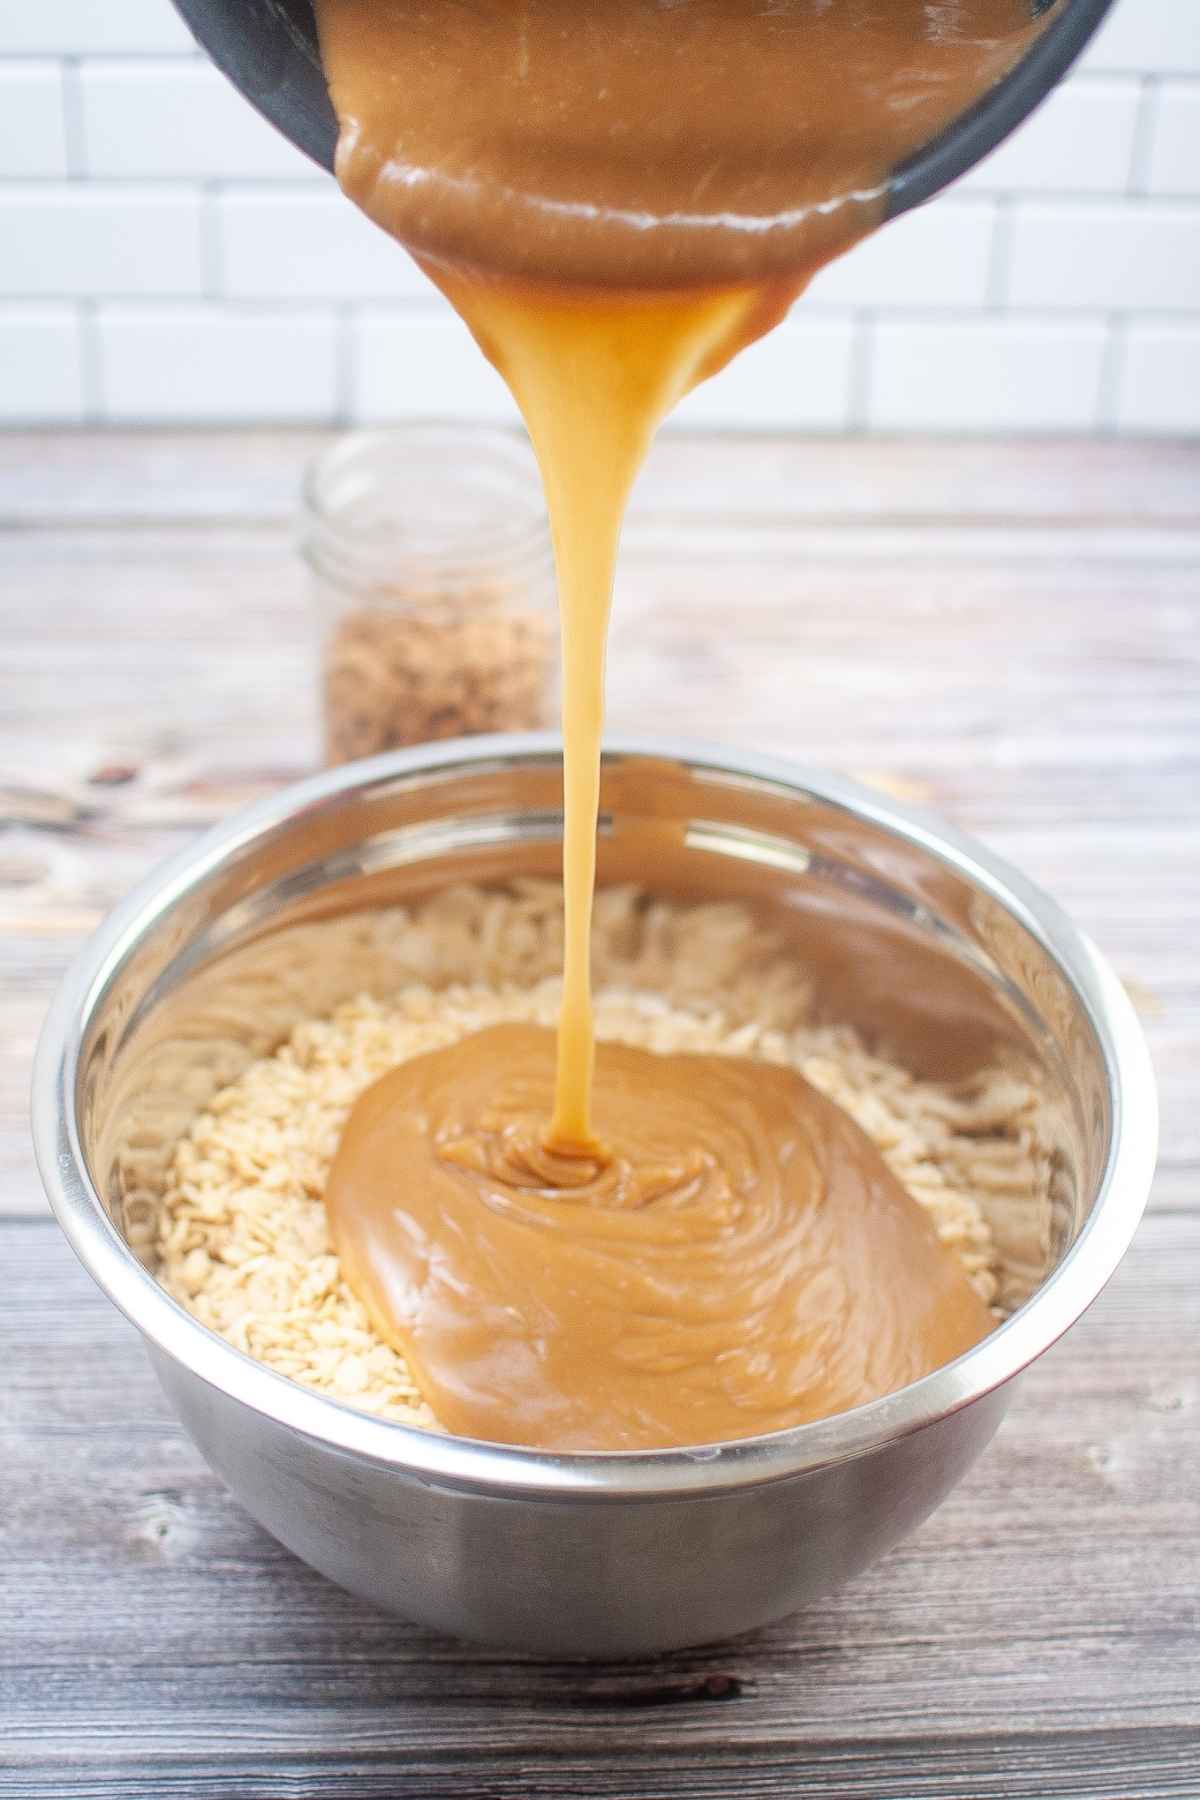 Pouring the peanut butter mixture over top of the dry ingredients.